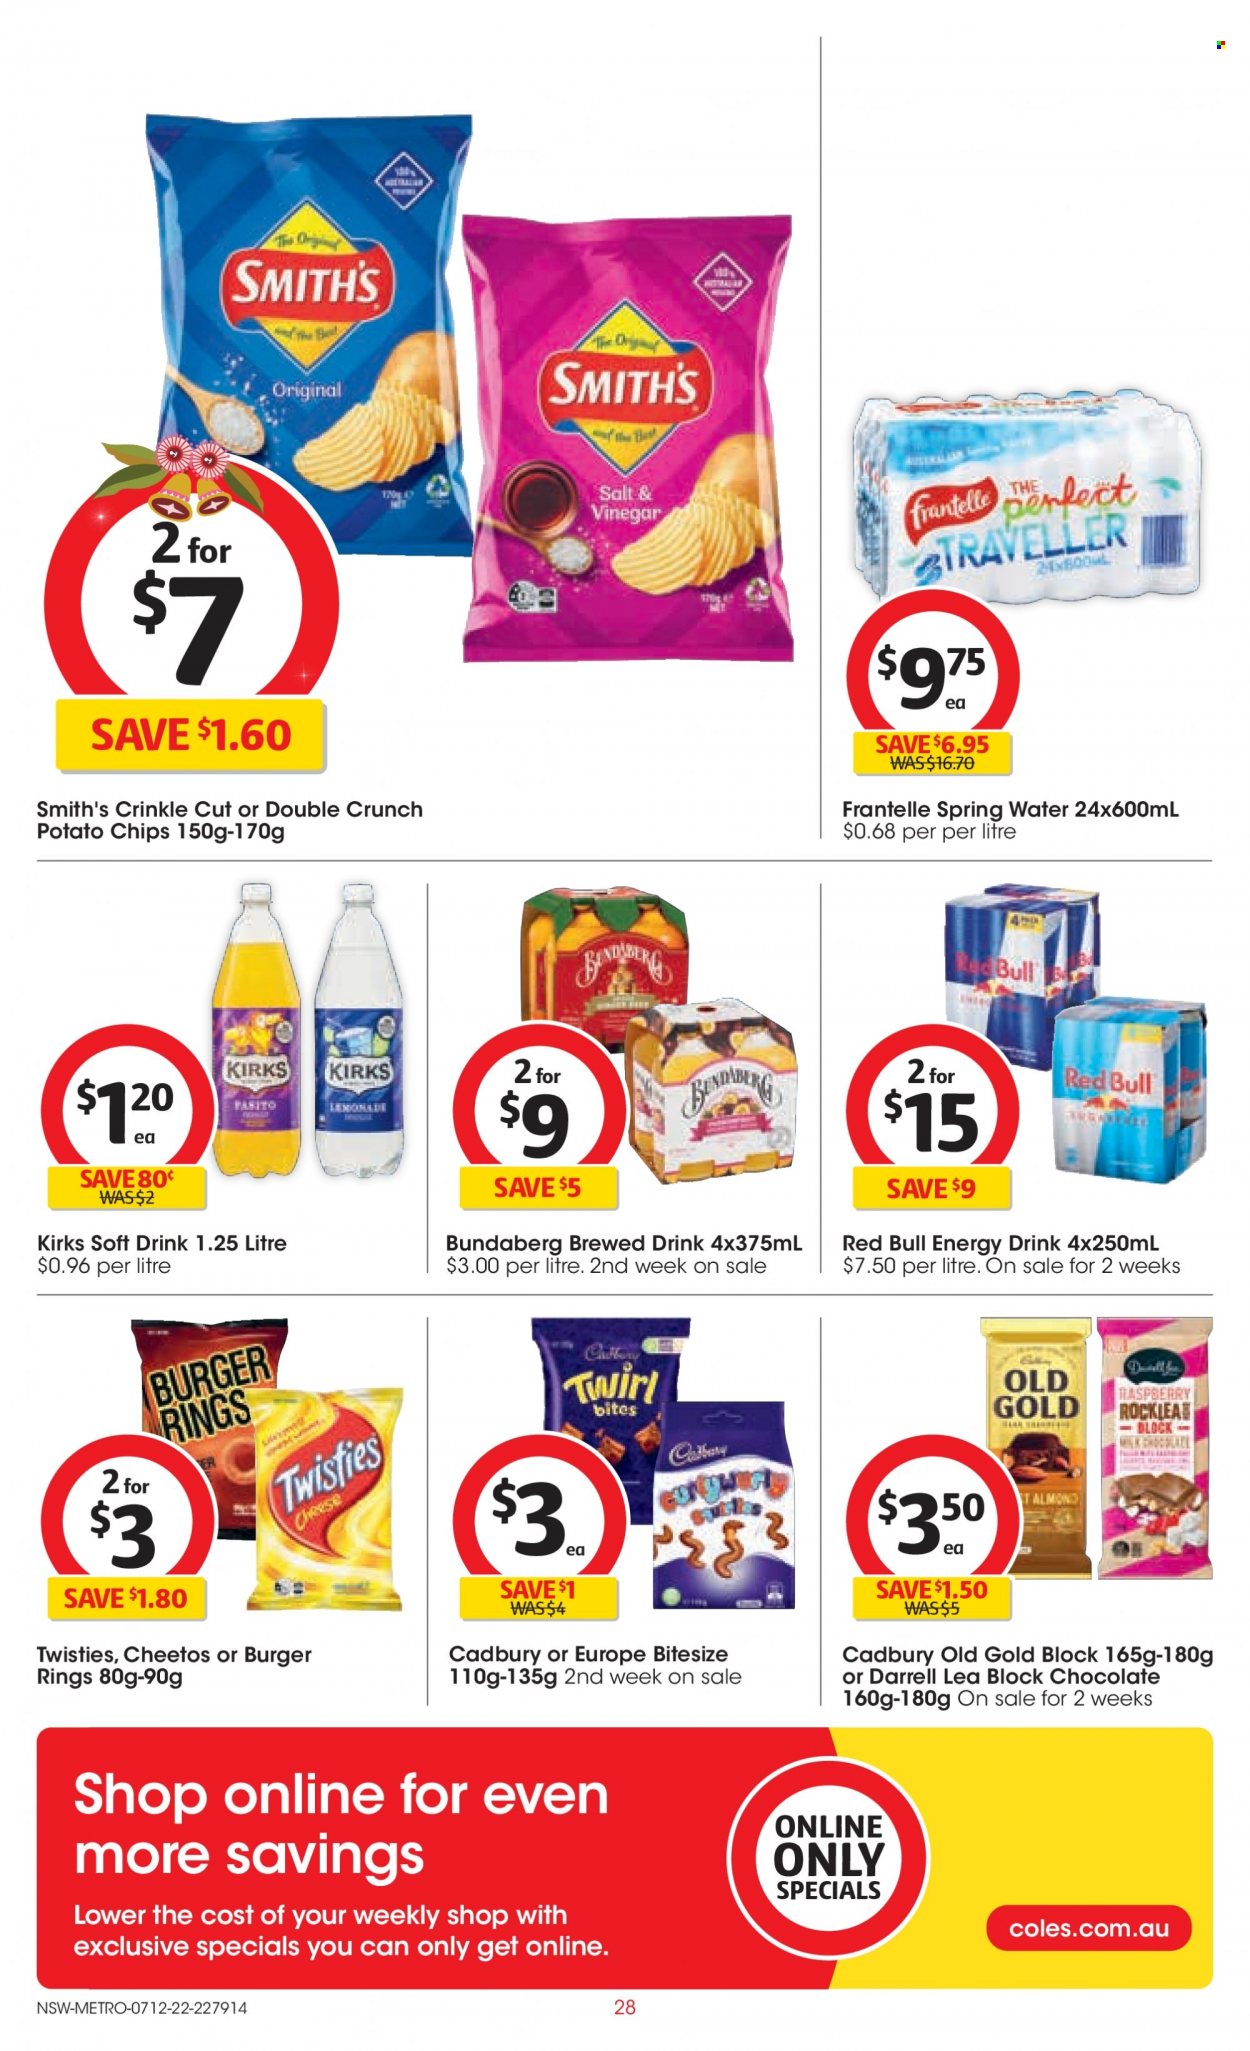 thumbnail - Coles Catalogue - 7 Dec 2022 - 13 Dec 2022 - Sales products - hamburger, cheese, milk chocolate, chocolate, Cadbury, potato chips, Cheetos, chips, Smith's, lemonade, energy drink, soft drink, Red Bull, spring water, Bundaberg, brewed drink. Page 28.